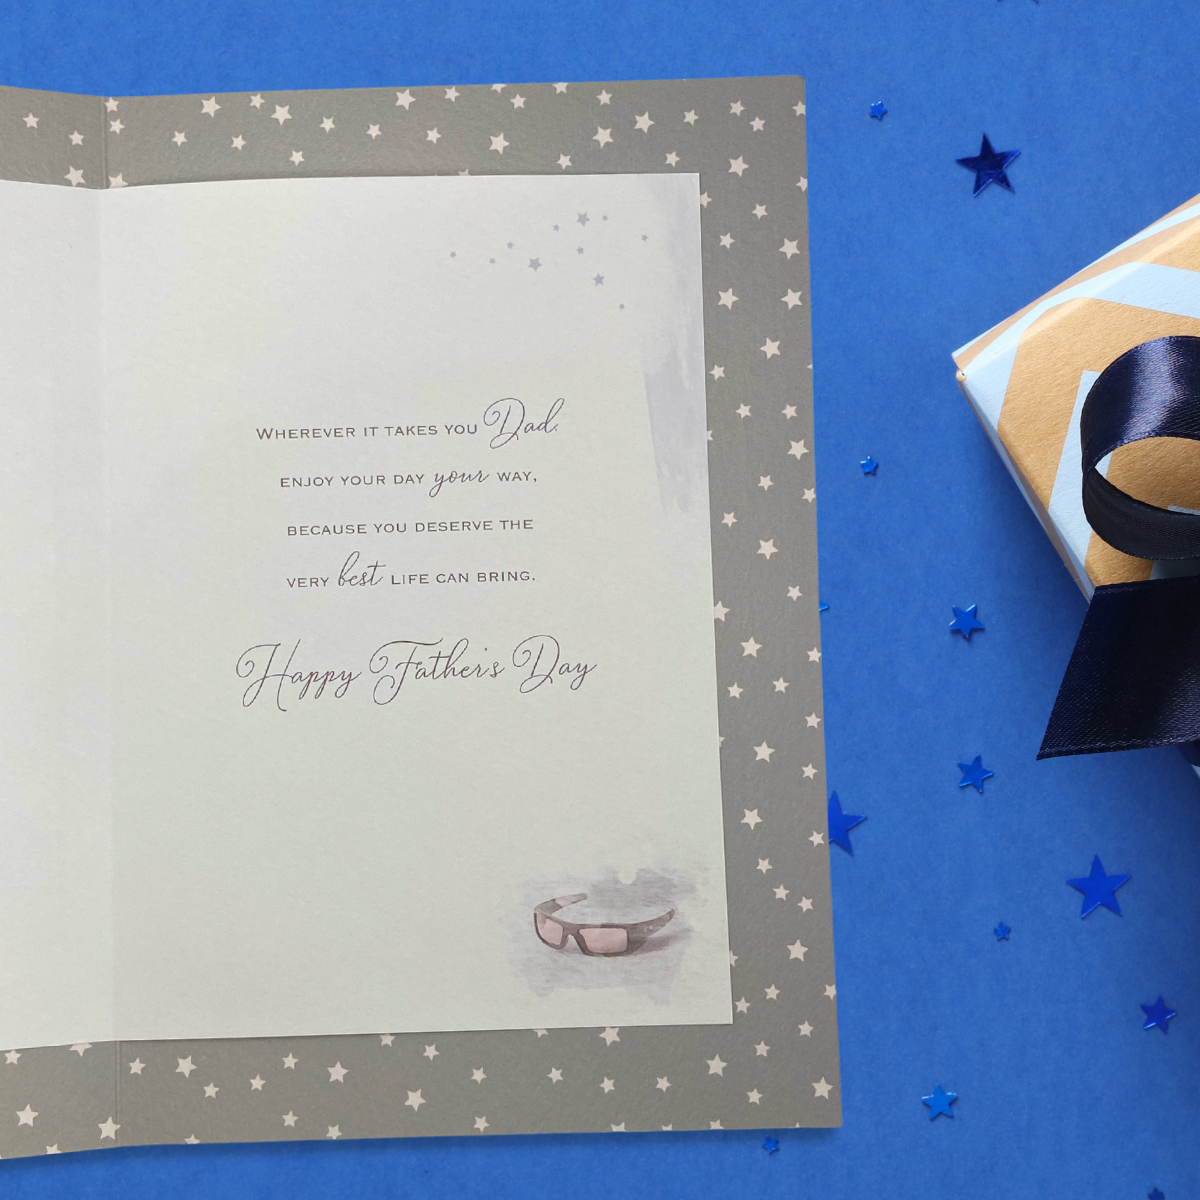 inside showing grey card with white stars and colour printed insert with verse and sunglasses